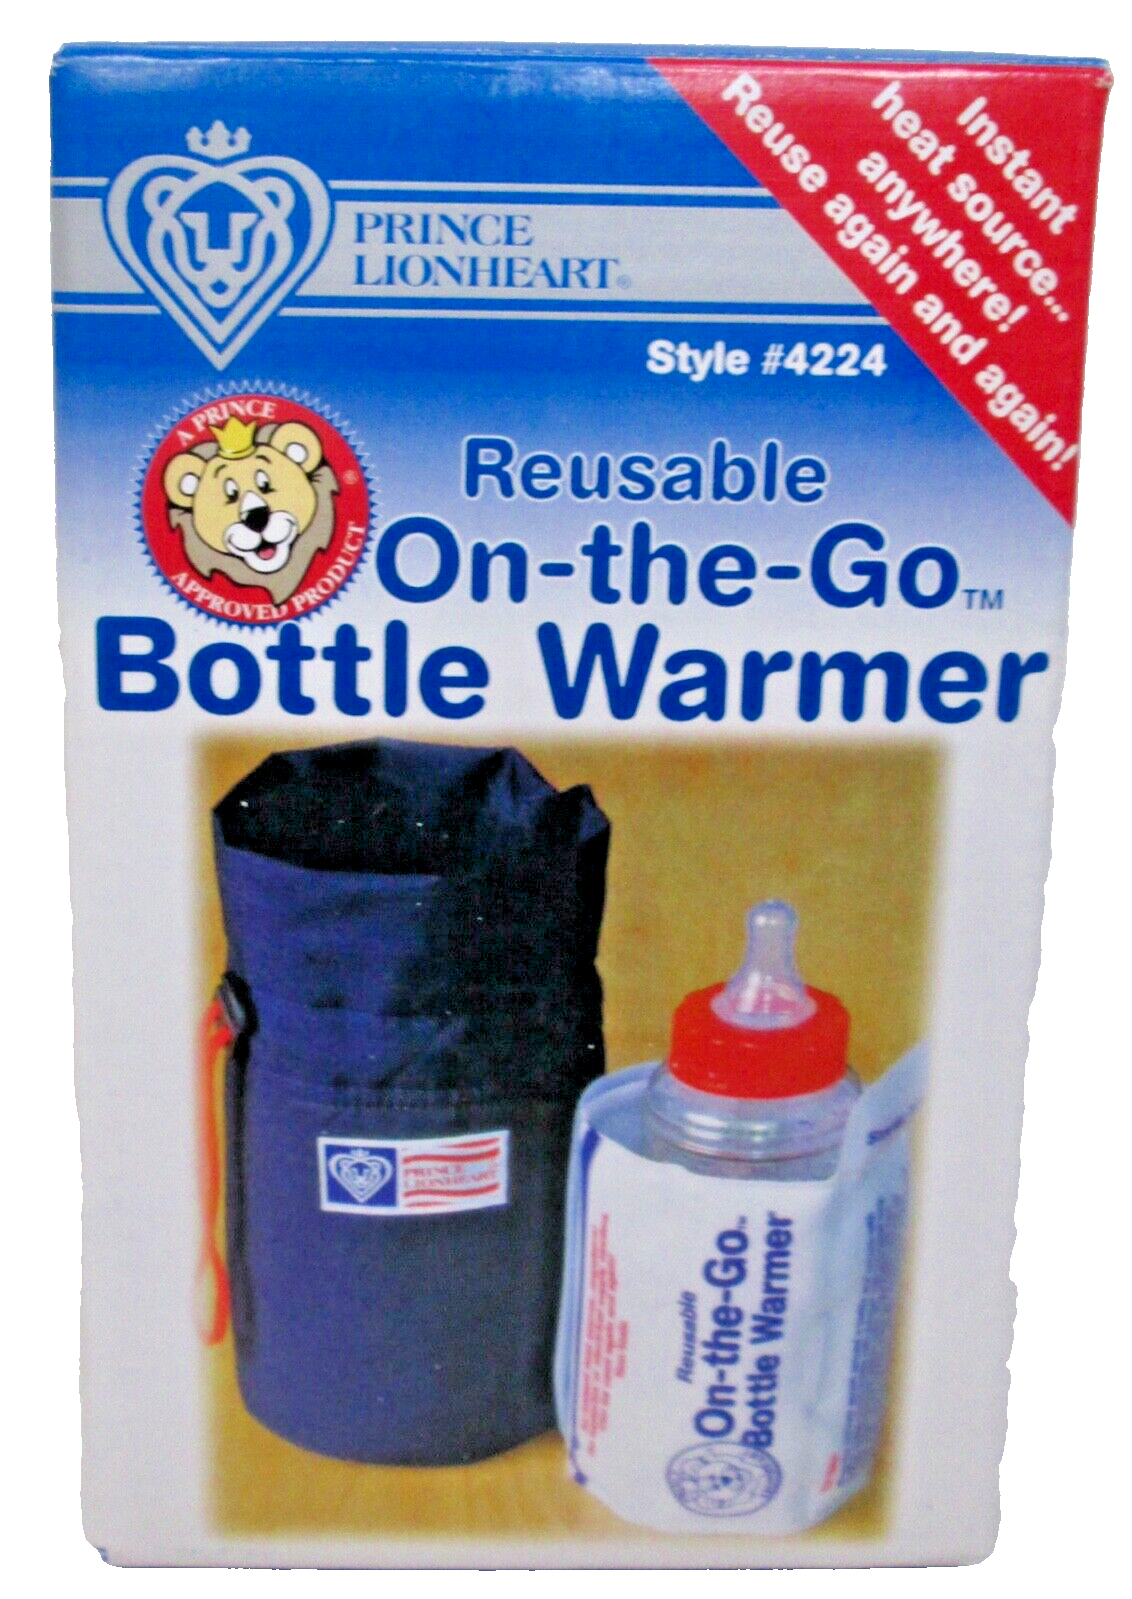 New Old Stock - Prince Lionheart Reusable On the Go Baby Bottle Warmer - $18.99